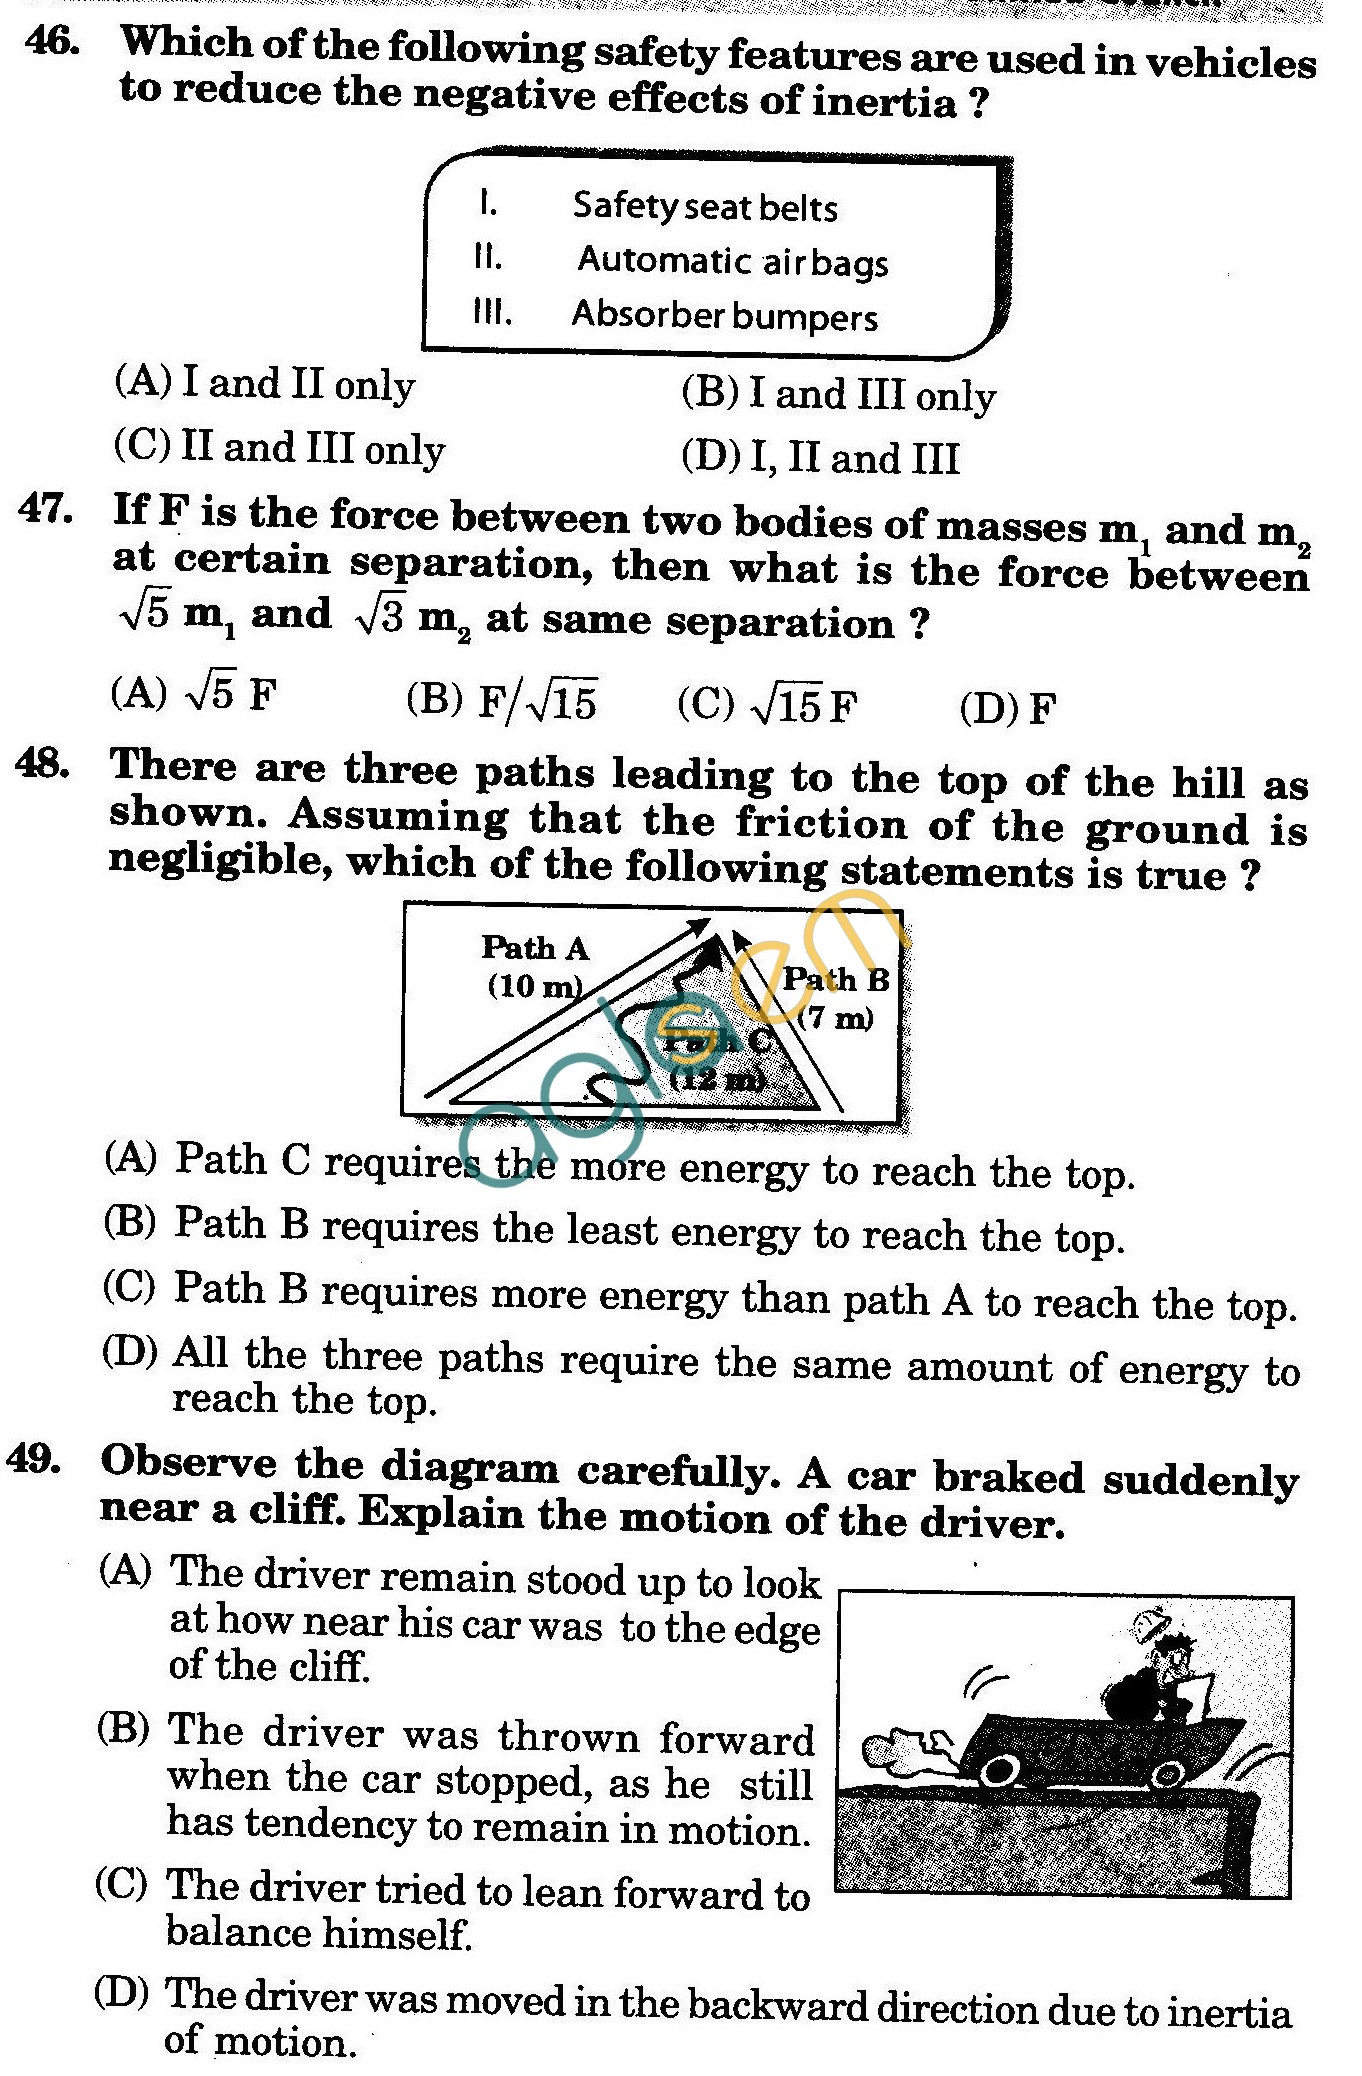 NSTSE 2010: Class IX Question Paper with Answers - Physics